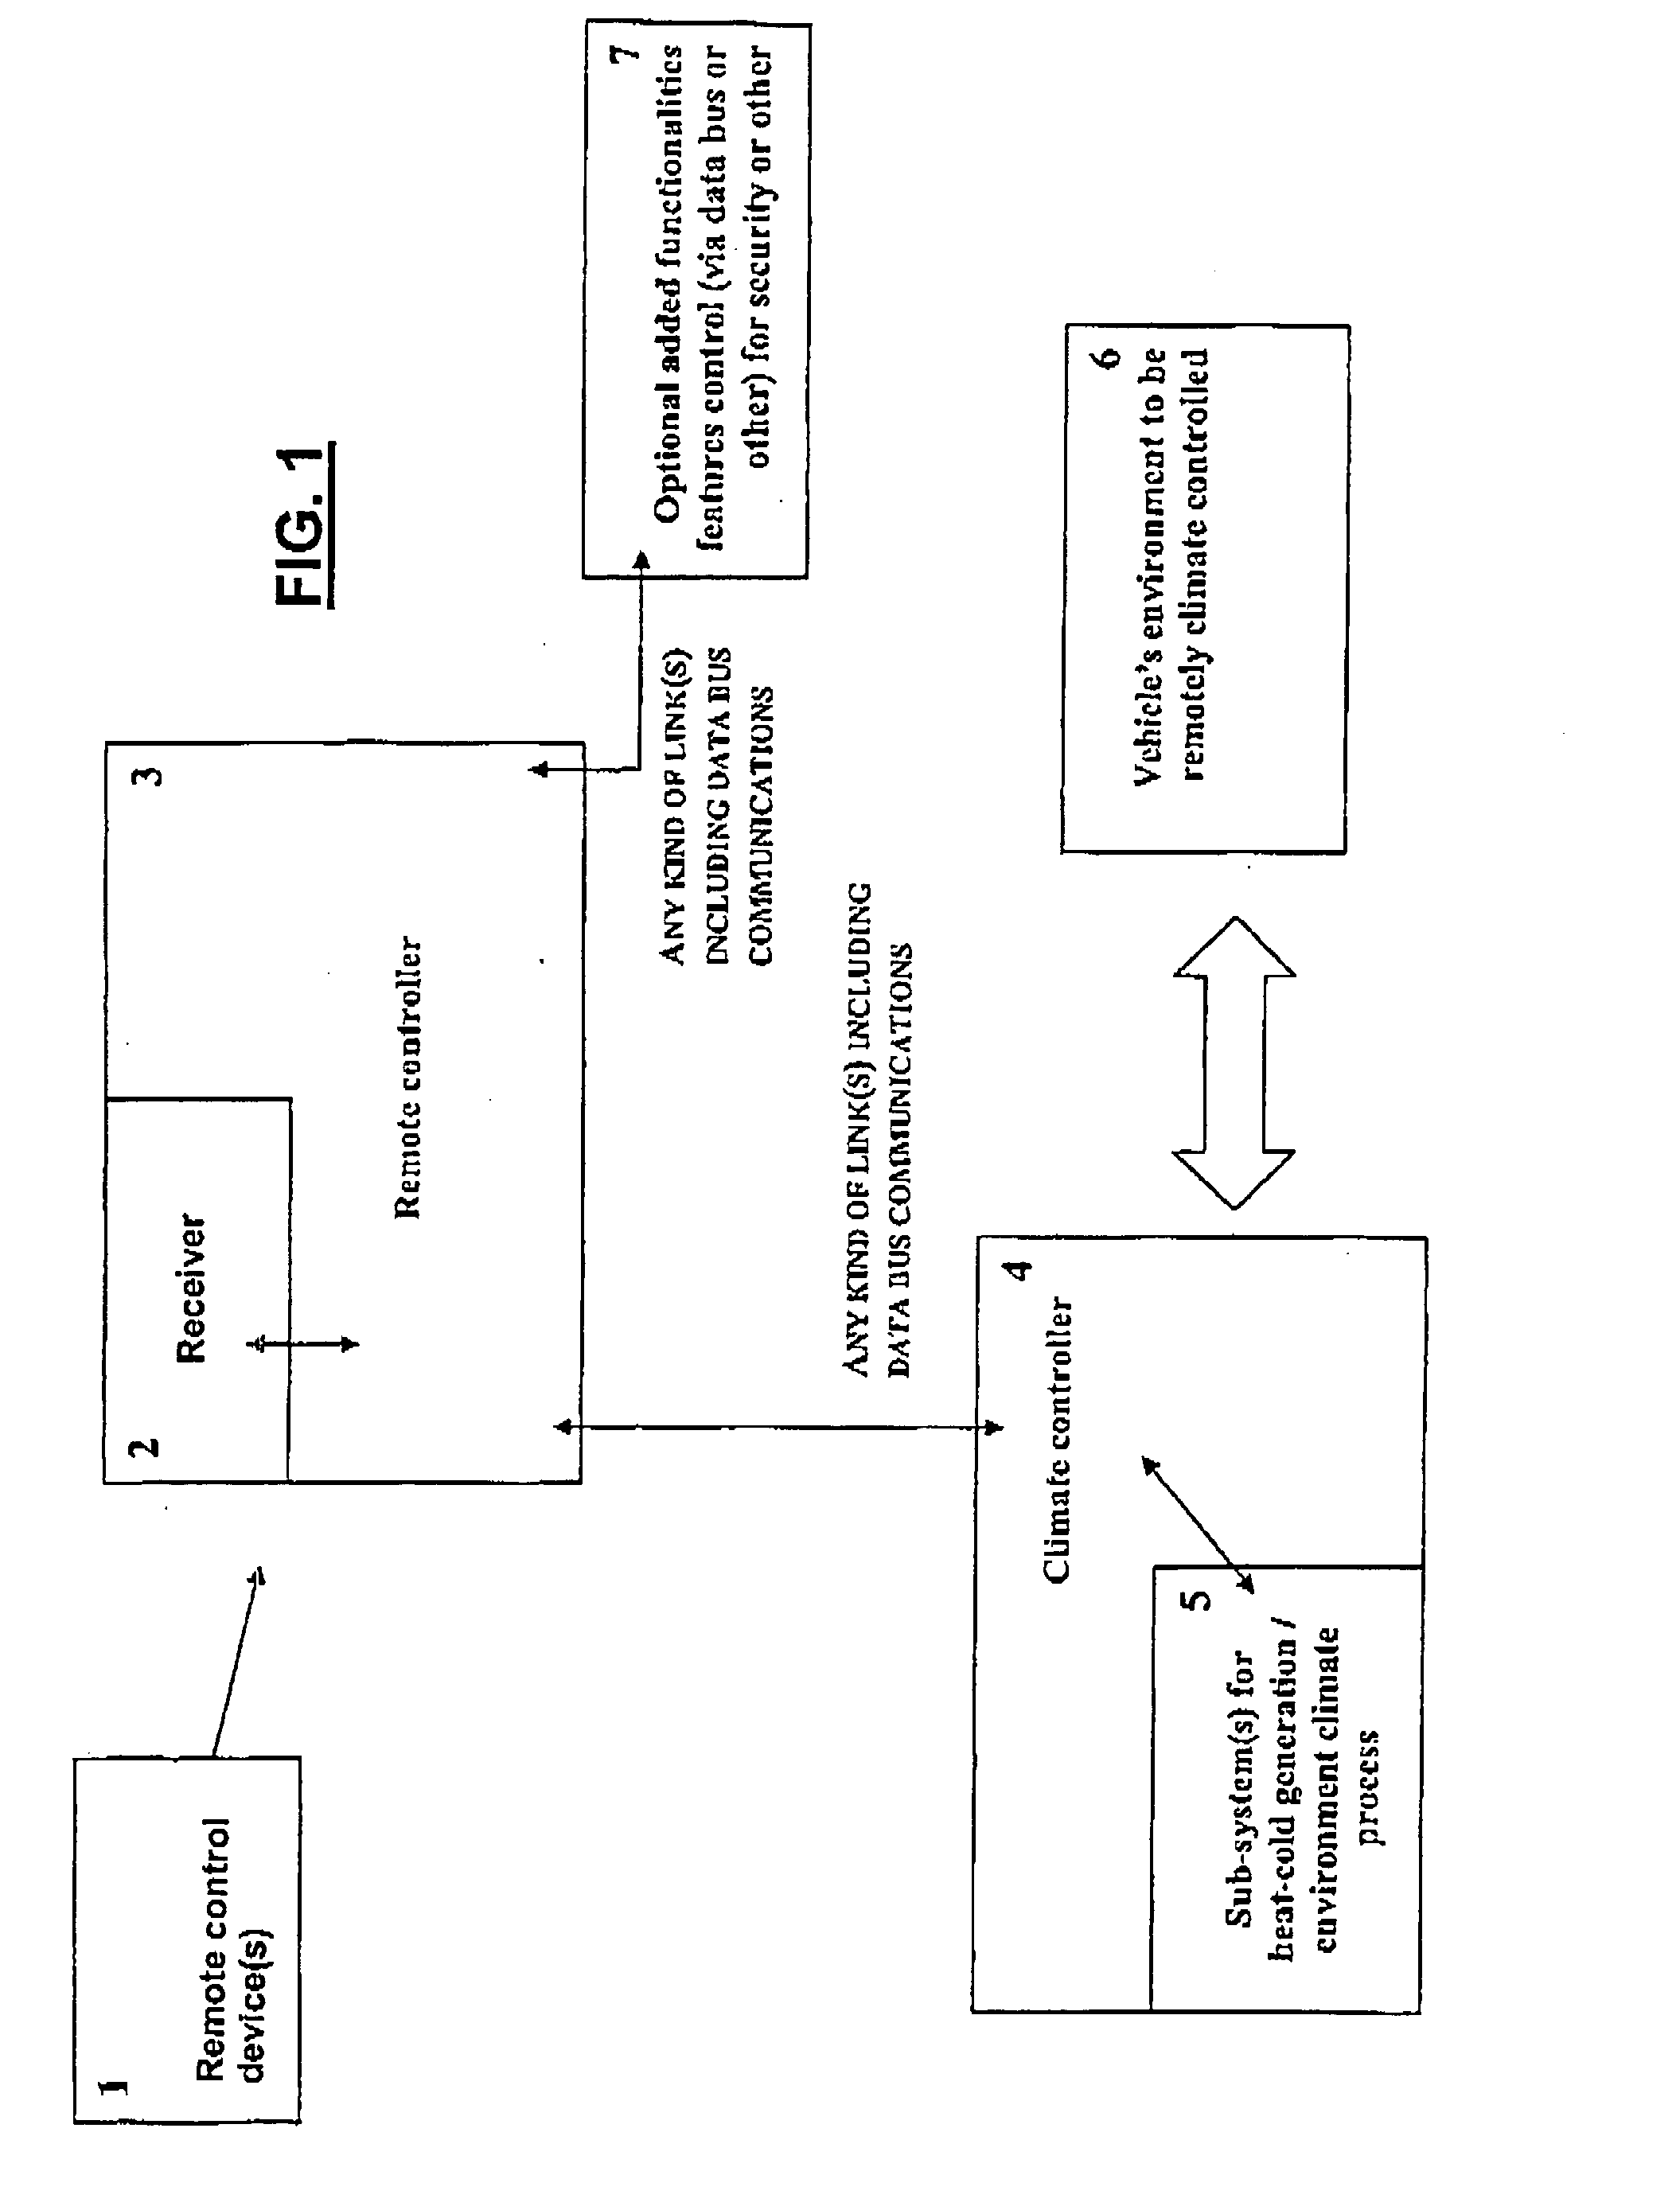 Vehicle remote control and air climate system